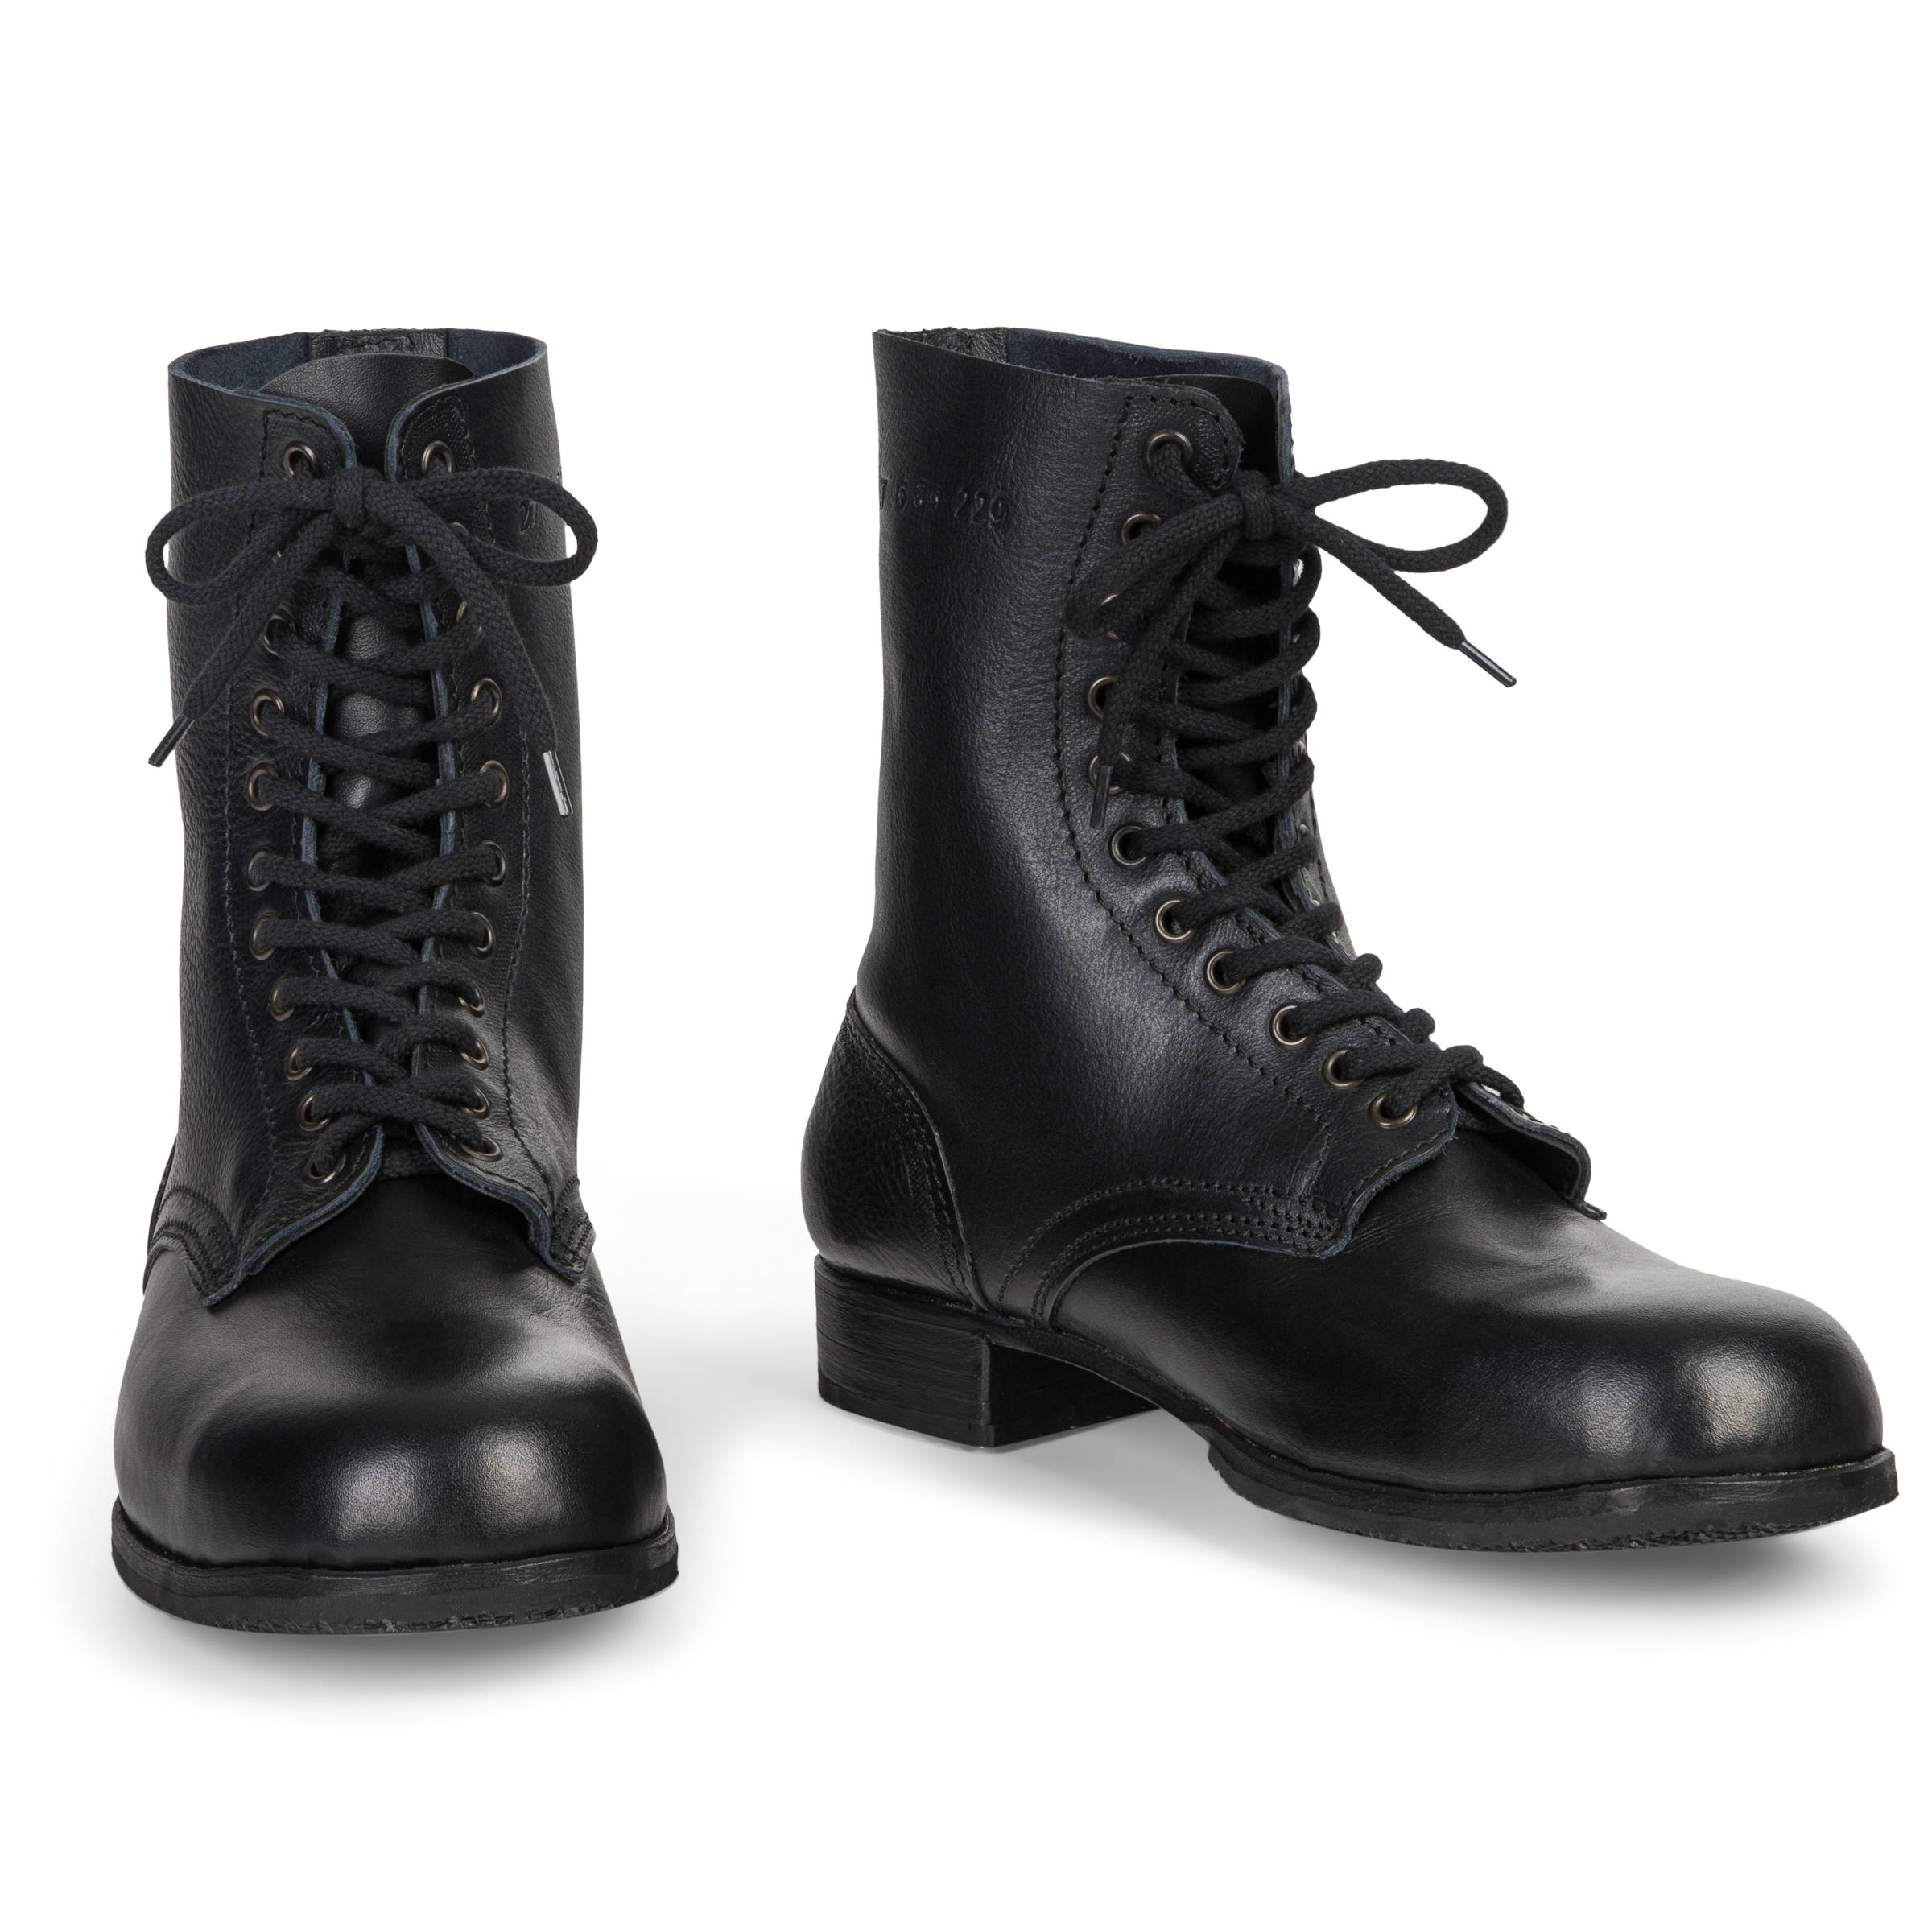 Panzerstiefel - German tanker ankle boots - repro - blackened 27 cm 294 ...